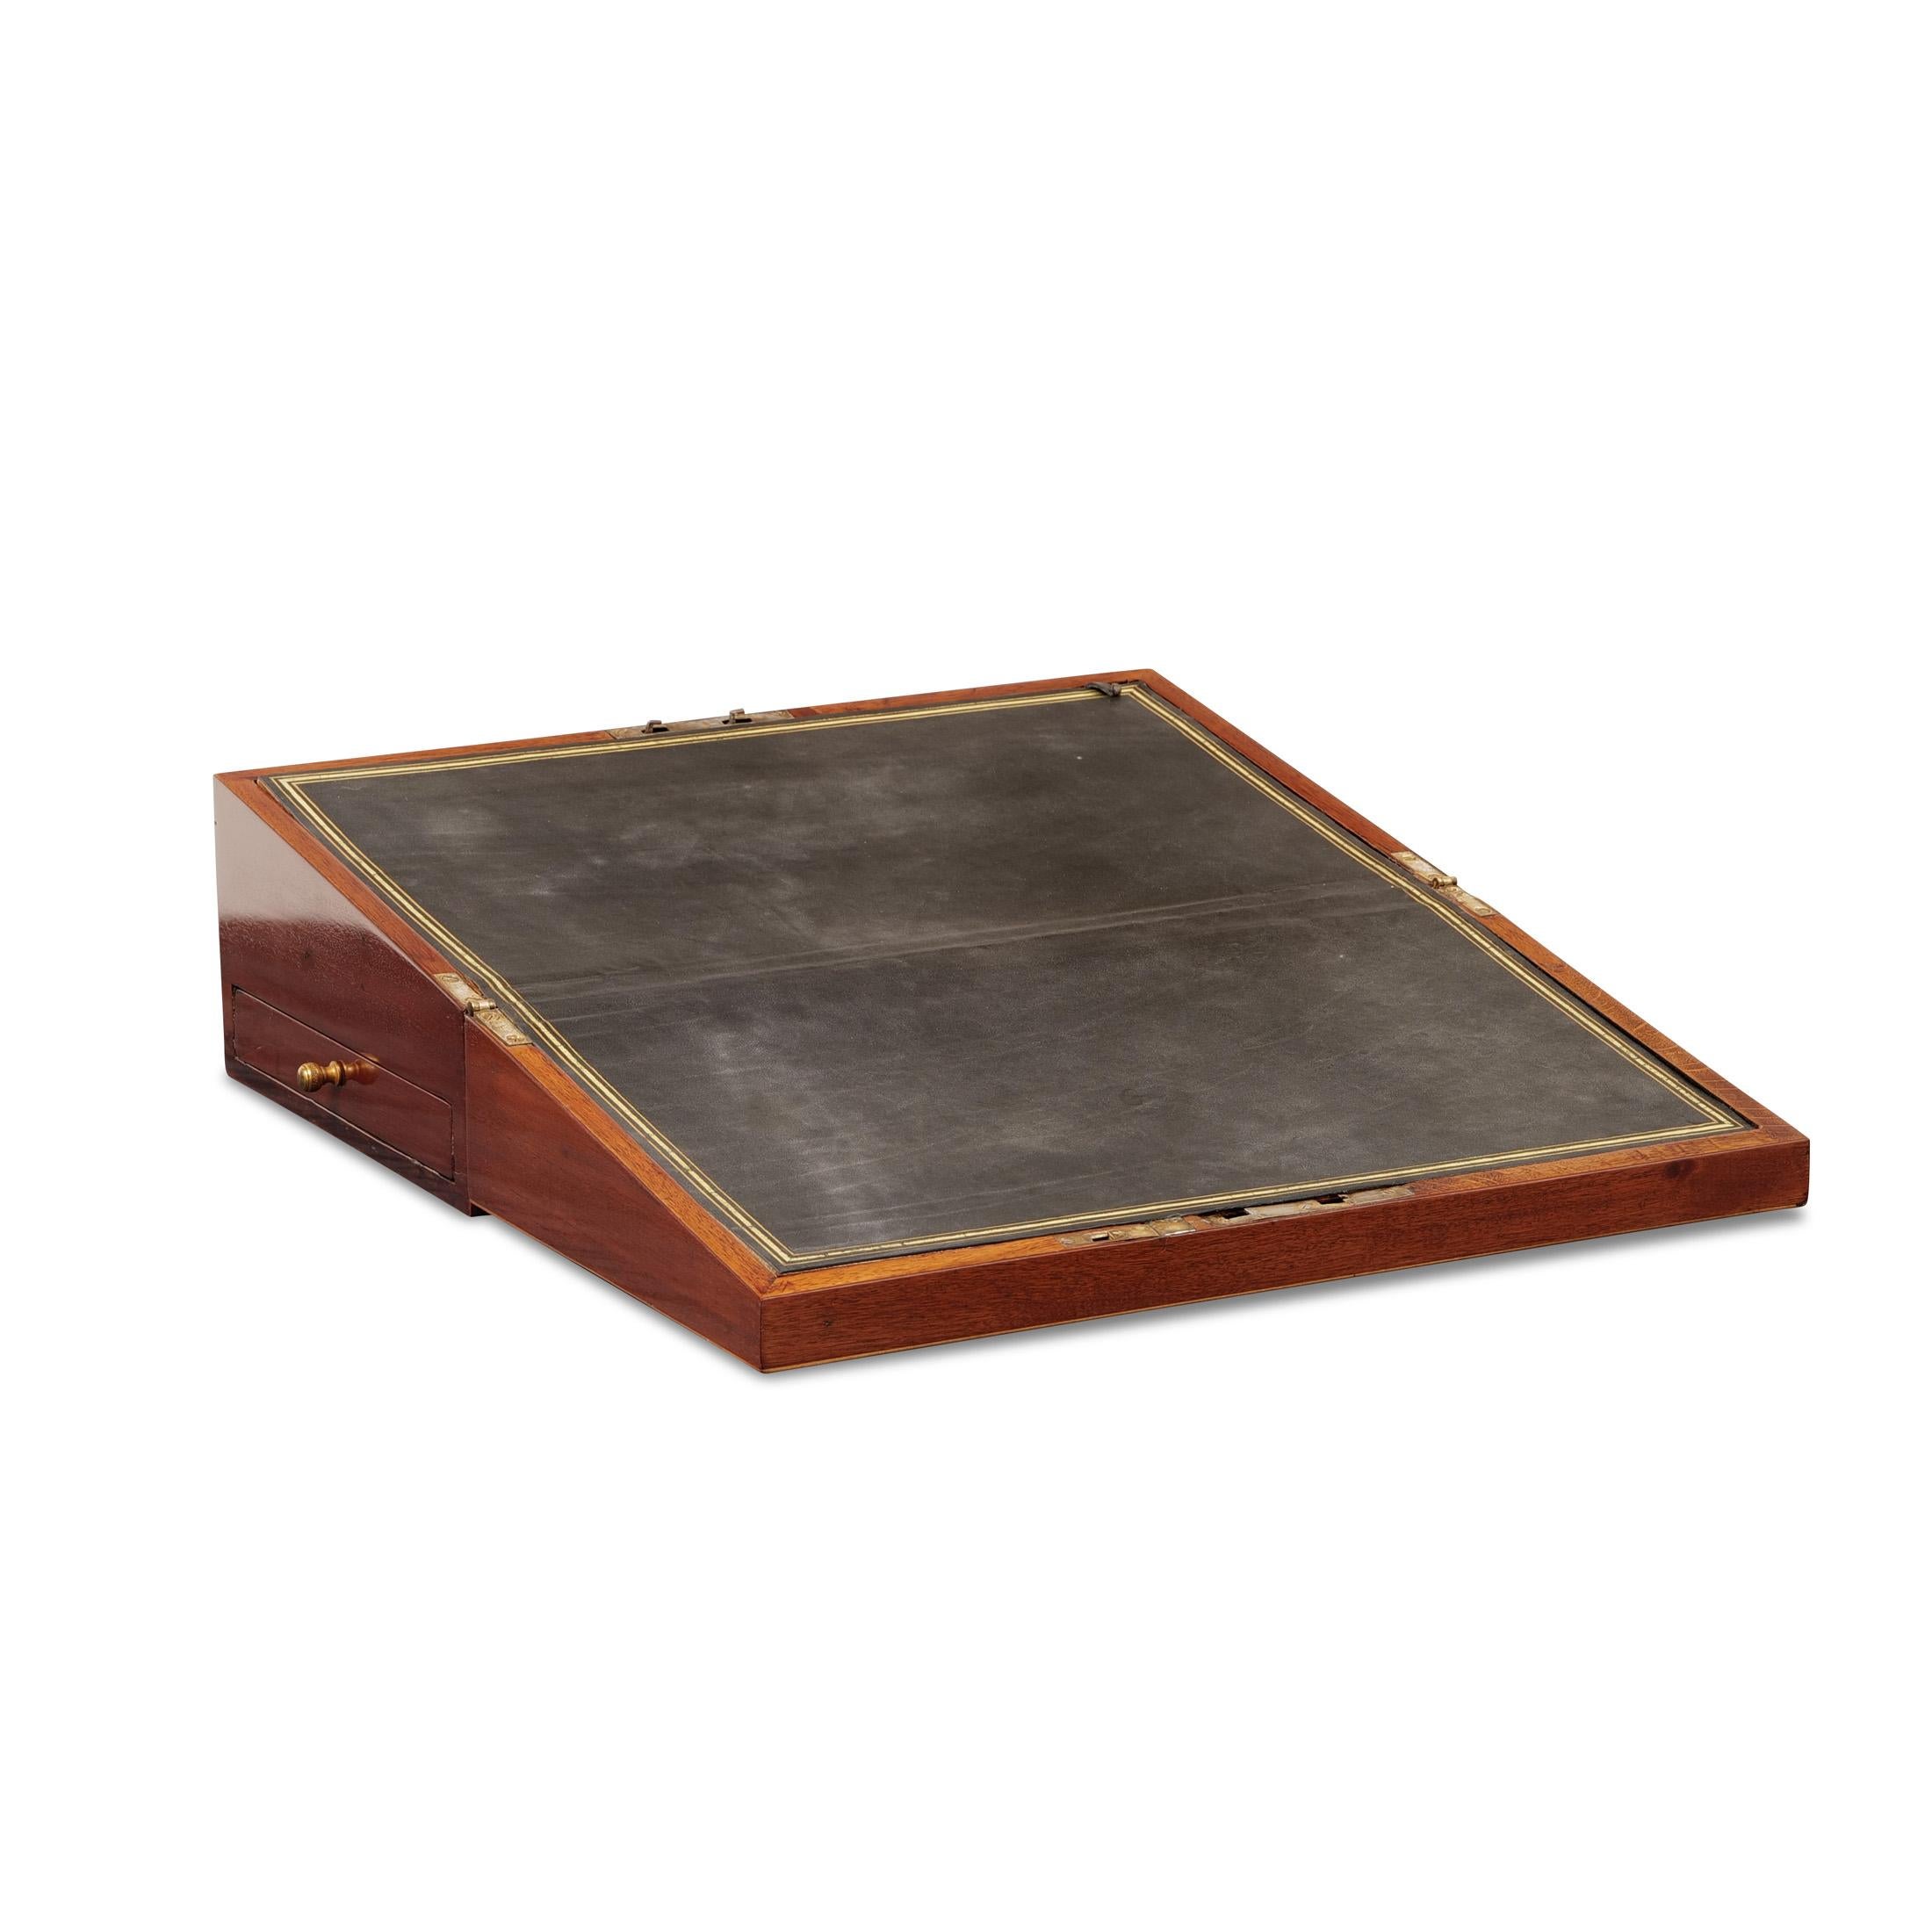 Writing box, mahogany, England, around 1830, writing surface with leather overlay, nice interior division

Large writing box / travel writing desk

England around 1830, folding to travel writing desk, mahogany, on the lid central oval shell motif